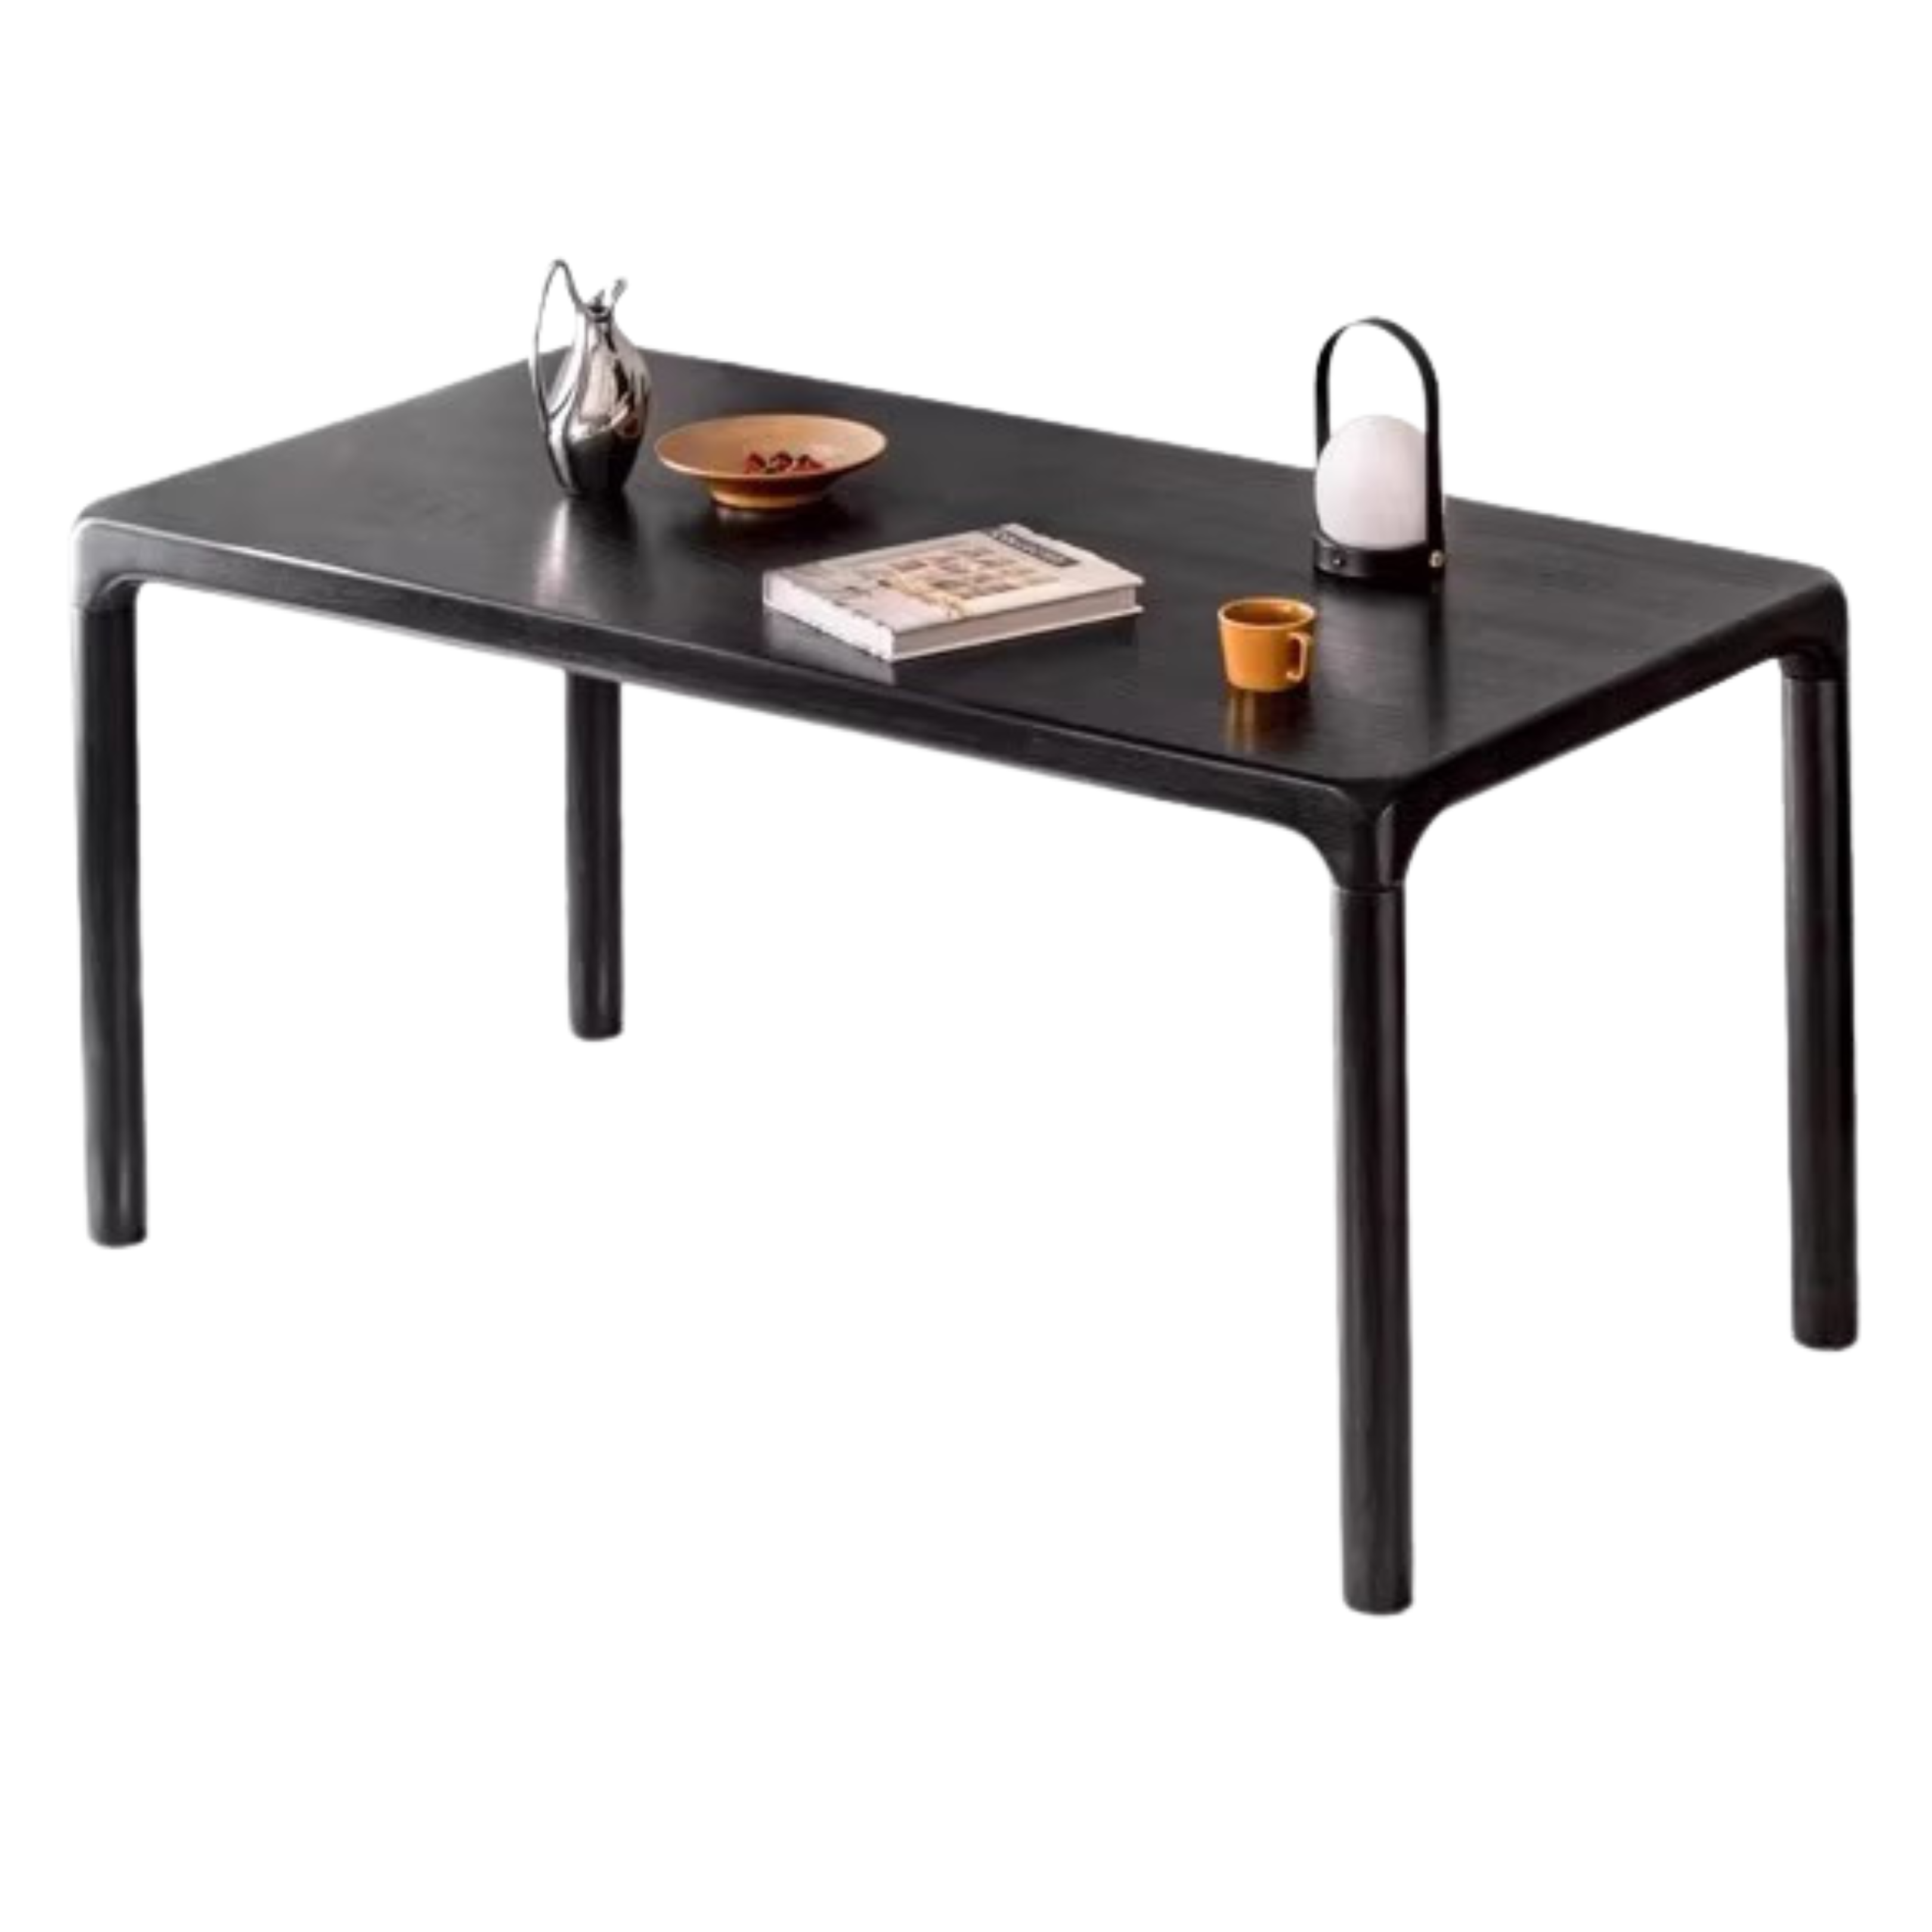 Ash solid wood Black Nordic Dining table